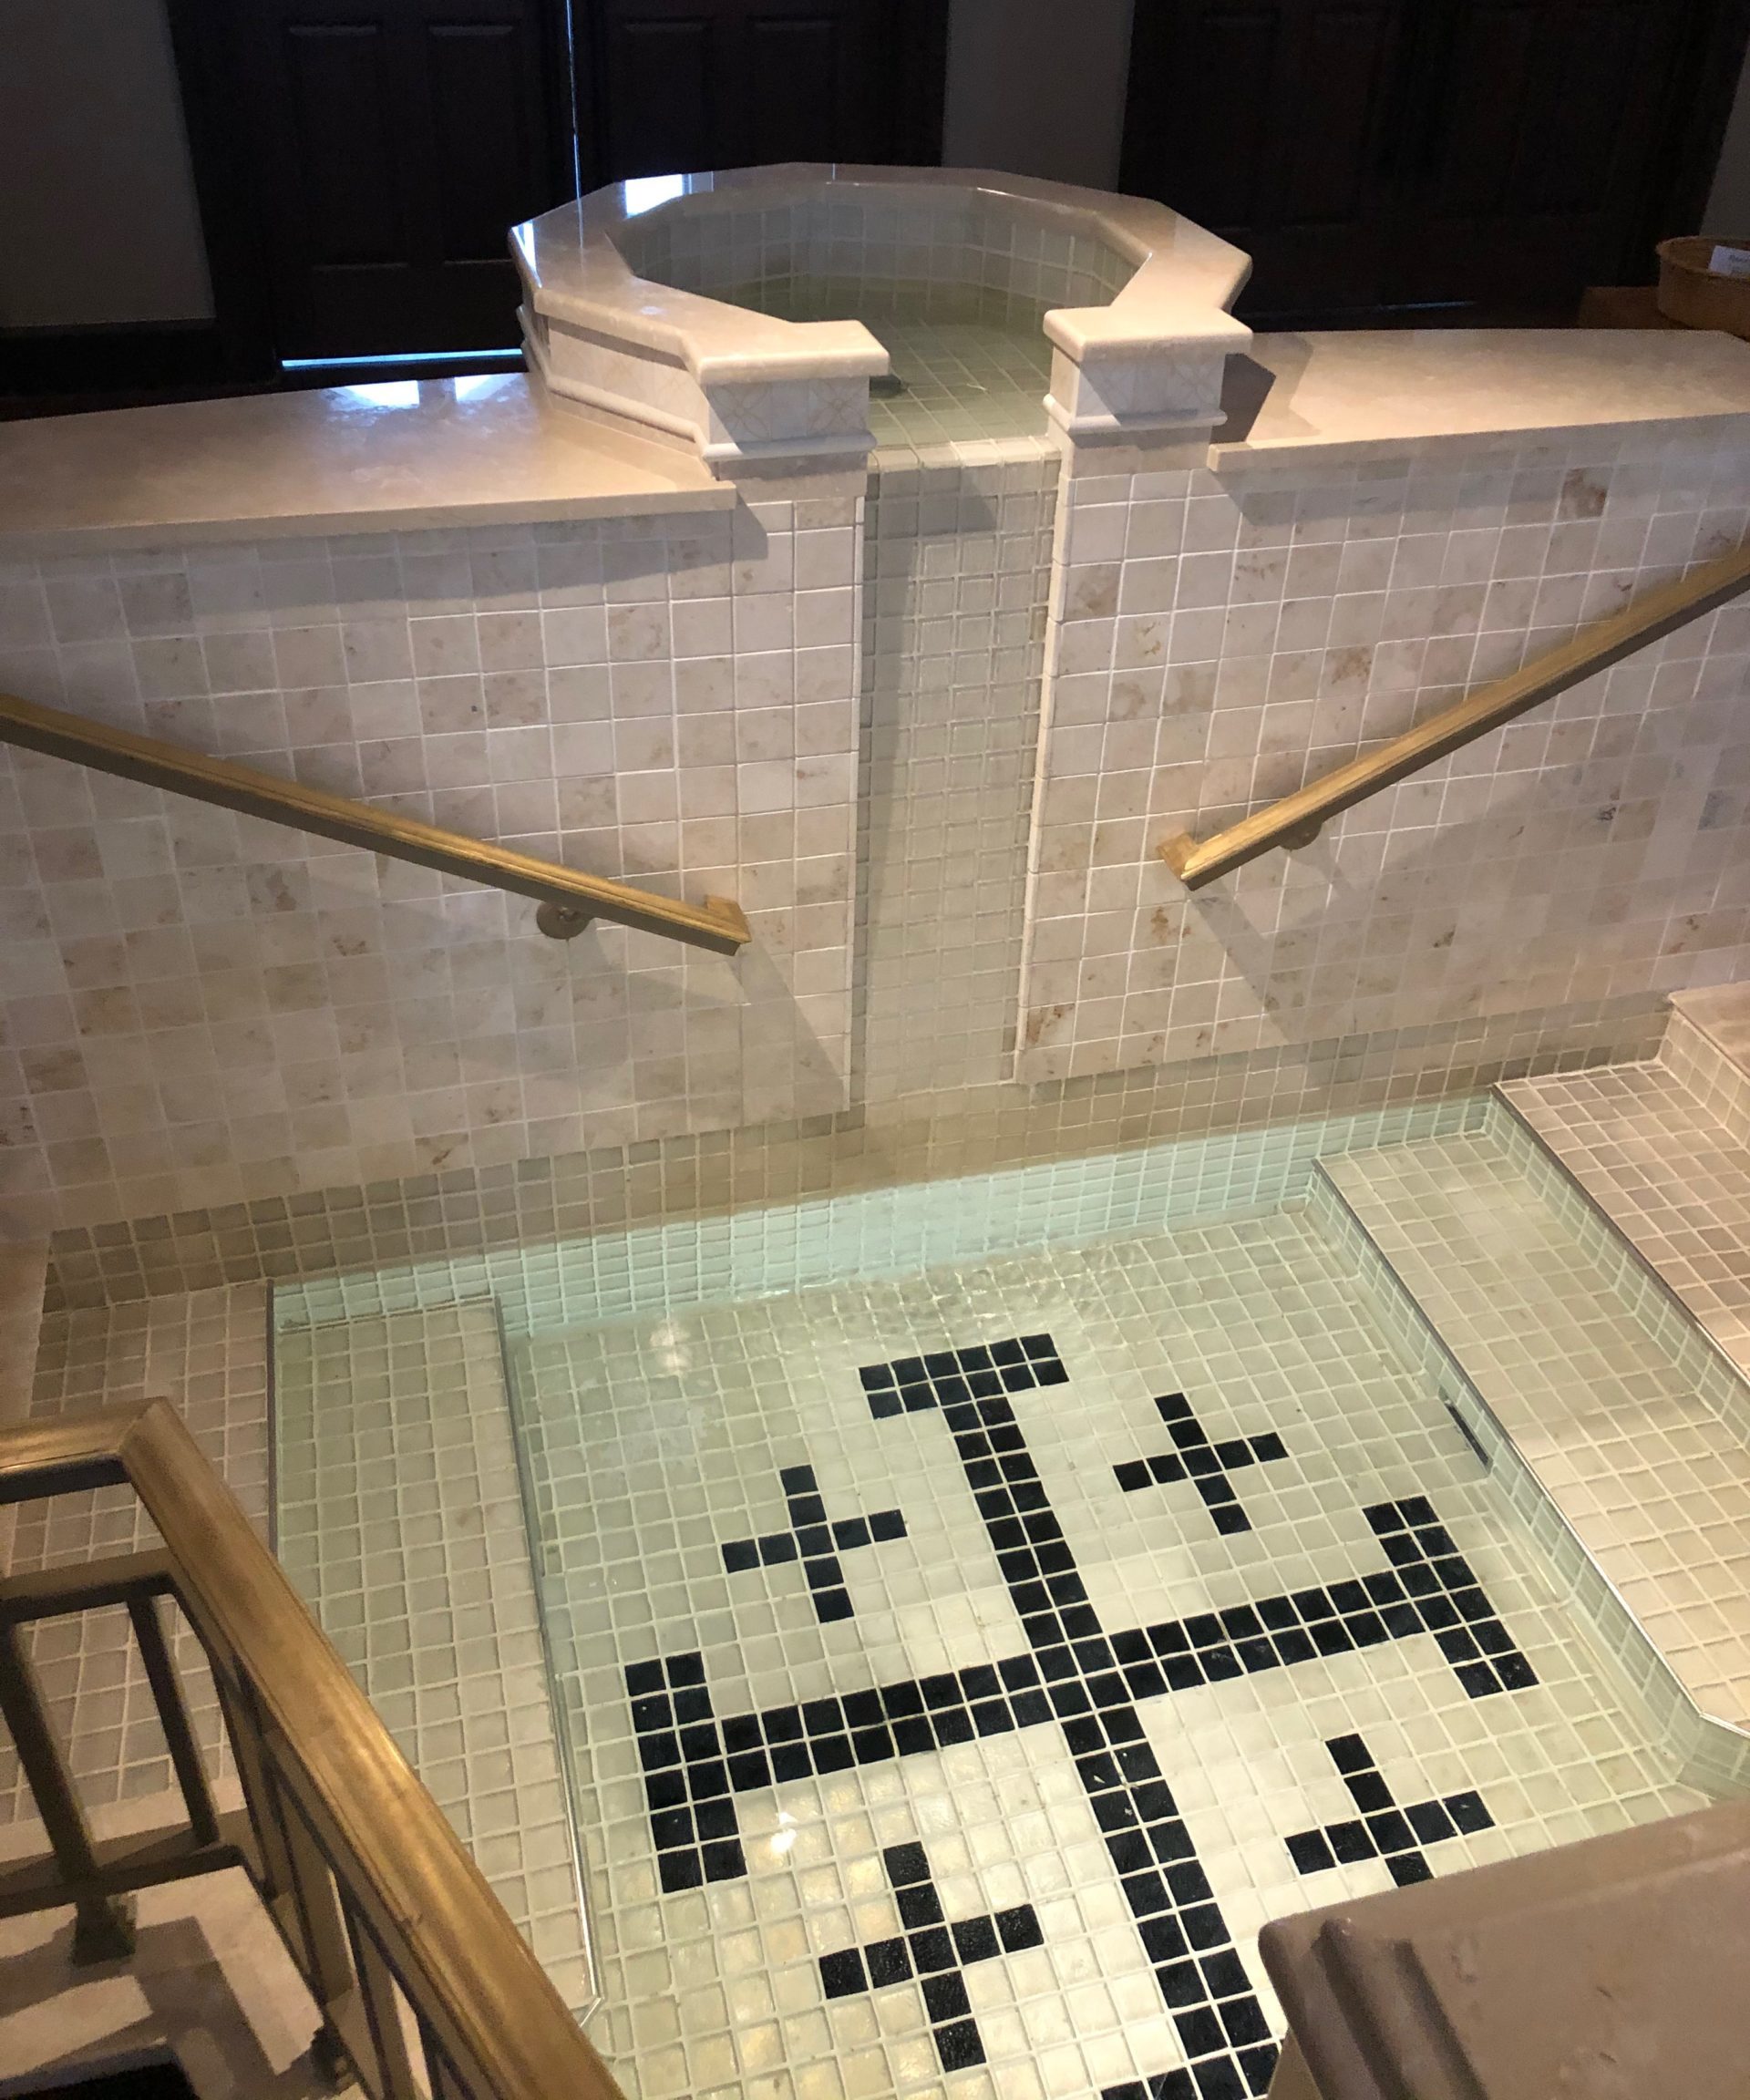 Immersion Baptismal Font, Floor and Upper Bowl with Spillway Design Details, Holy Spirit Church, Mustang, OK.